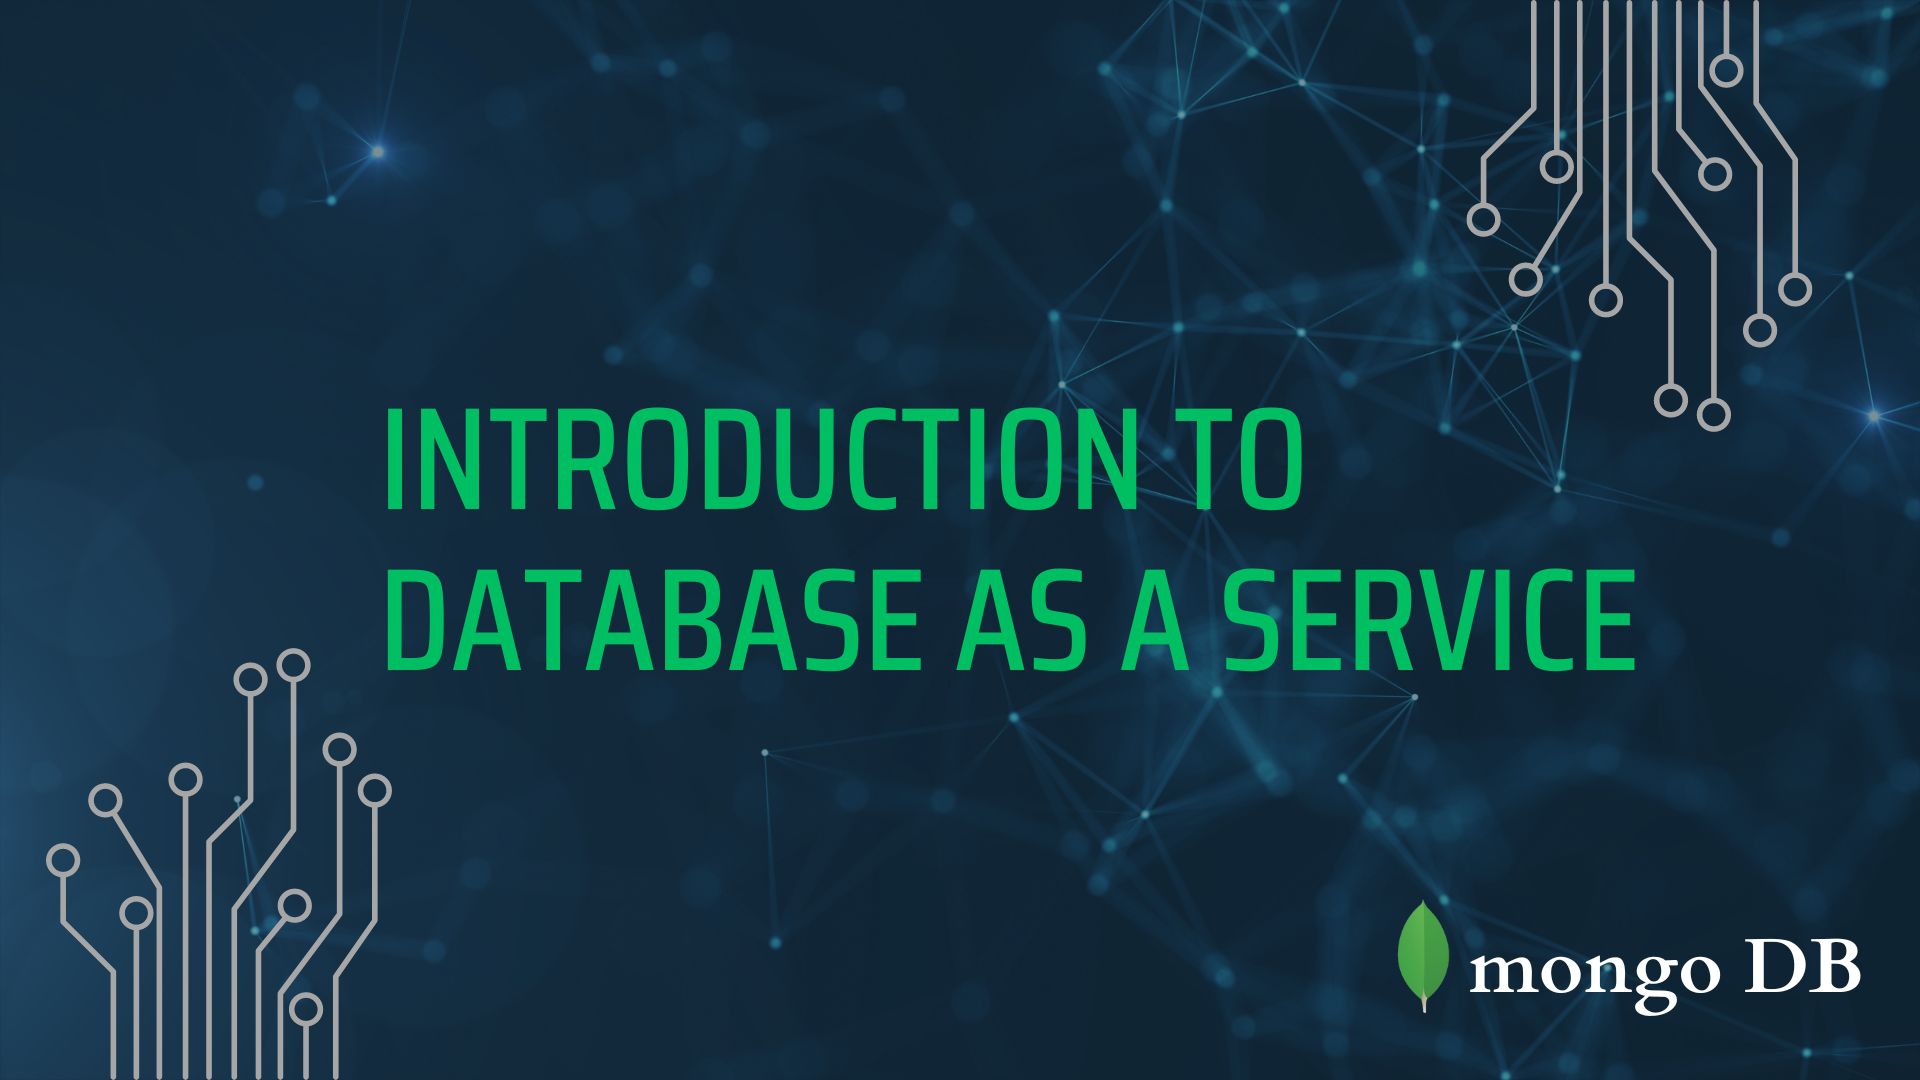 Introduction to database as a service